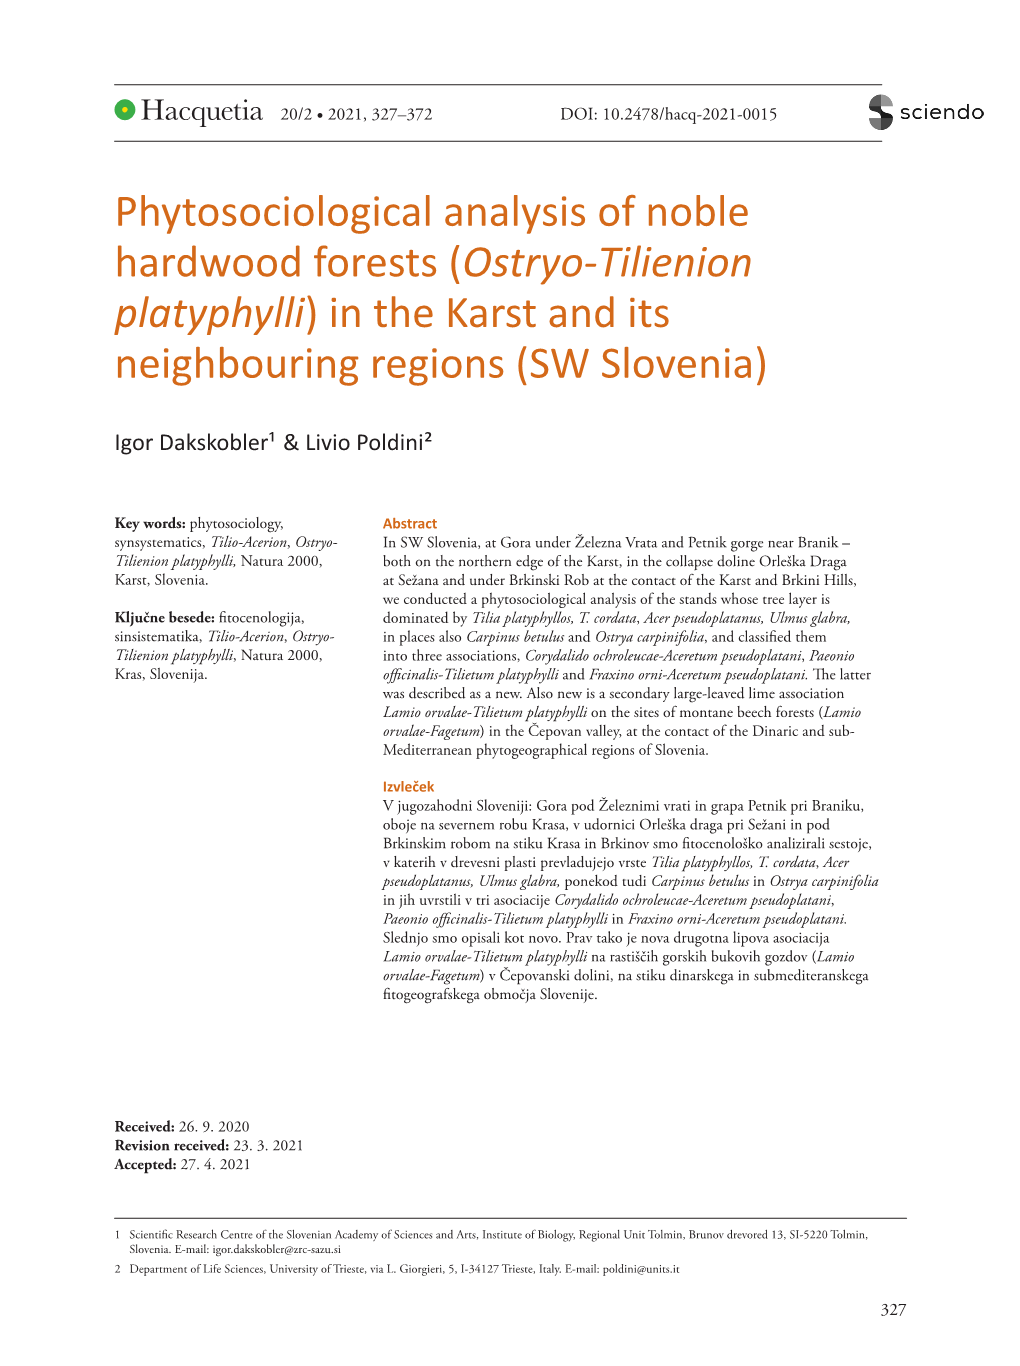 Phytosociological Analysis of Noble Hardwood Forests (Ostryo-Tilienion Platyphylli) in the Karst and Its Neighbouring Regions (SW Slovenia)